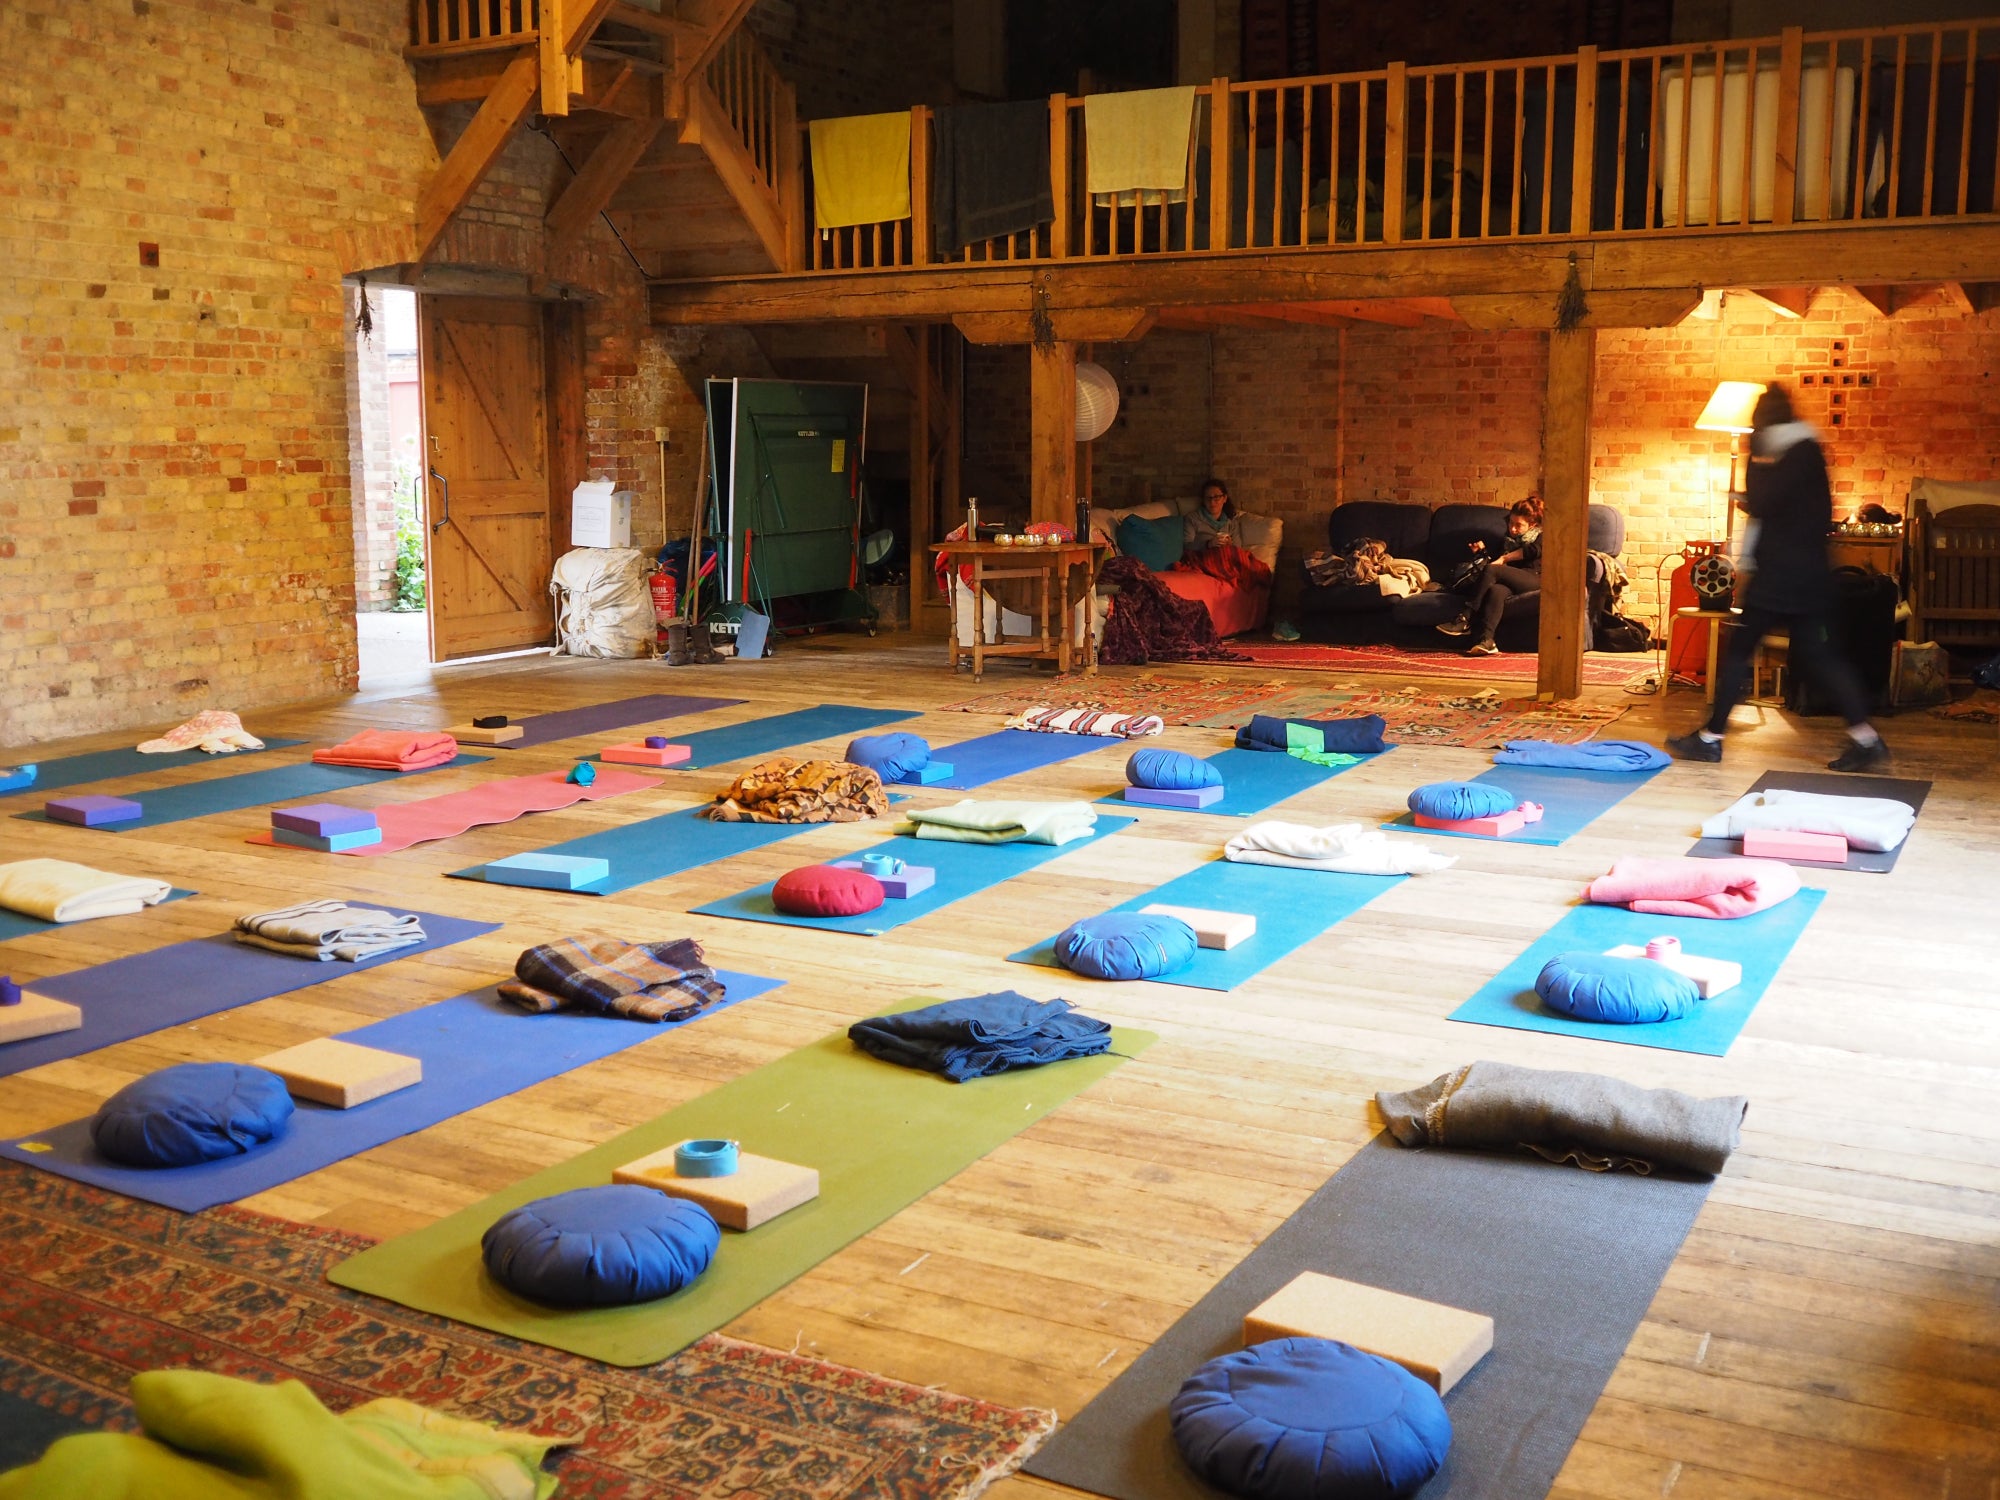 Yoga workshops are popular with Londoners